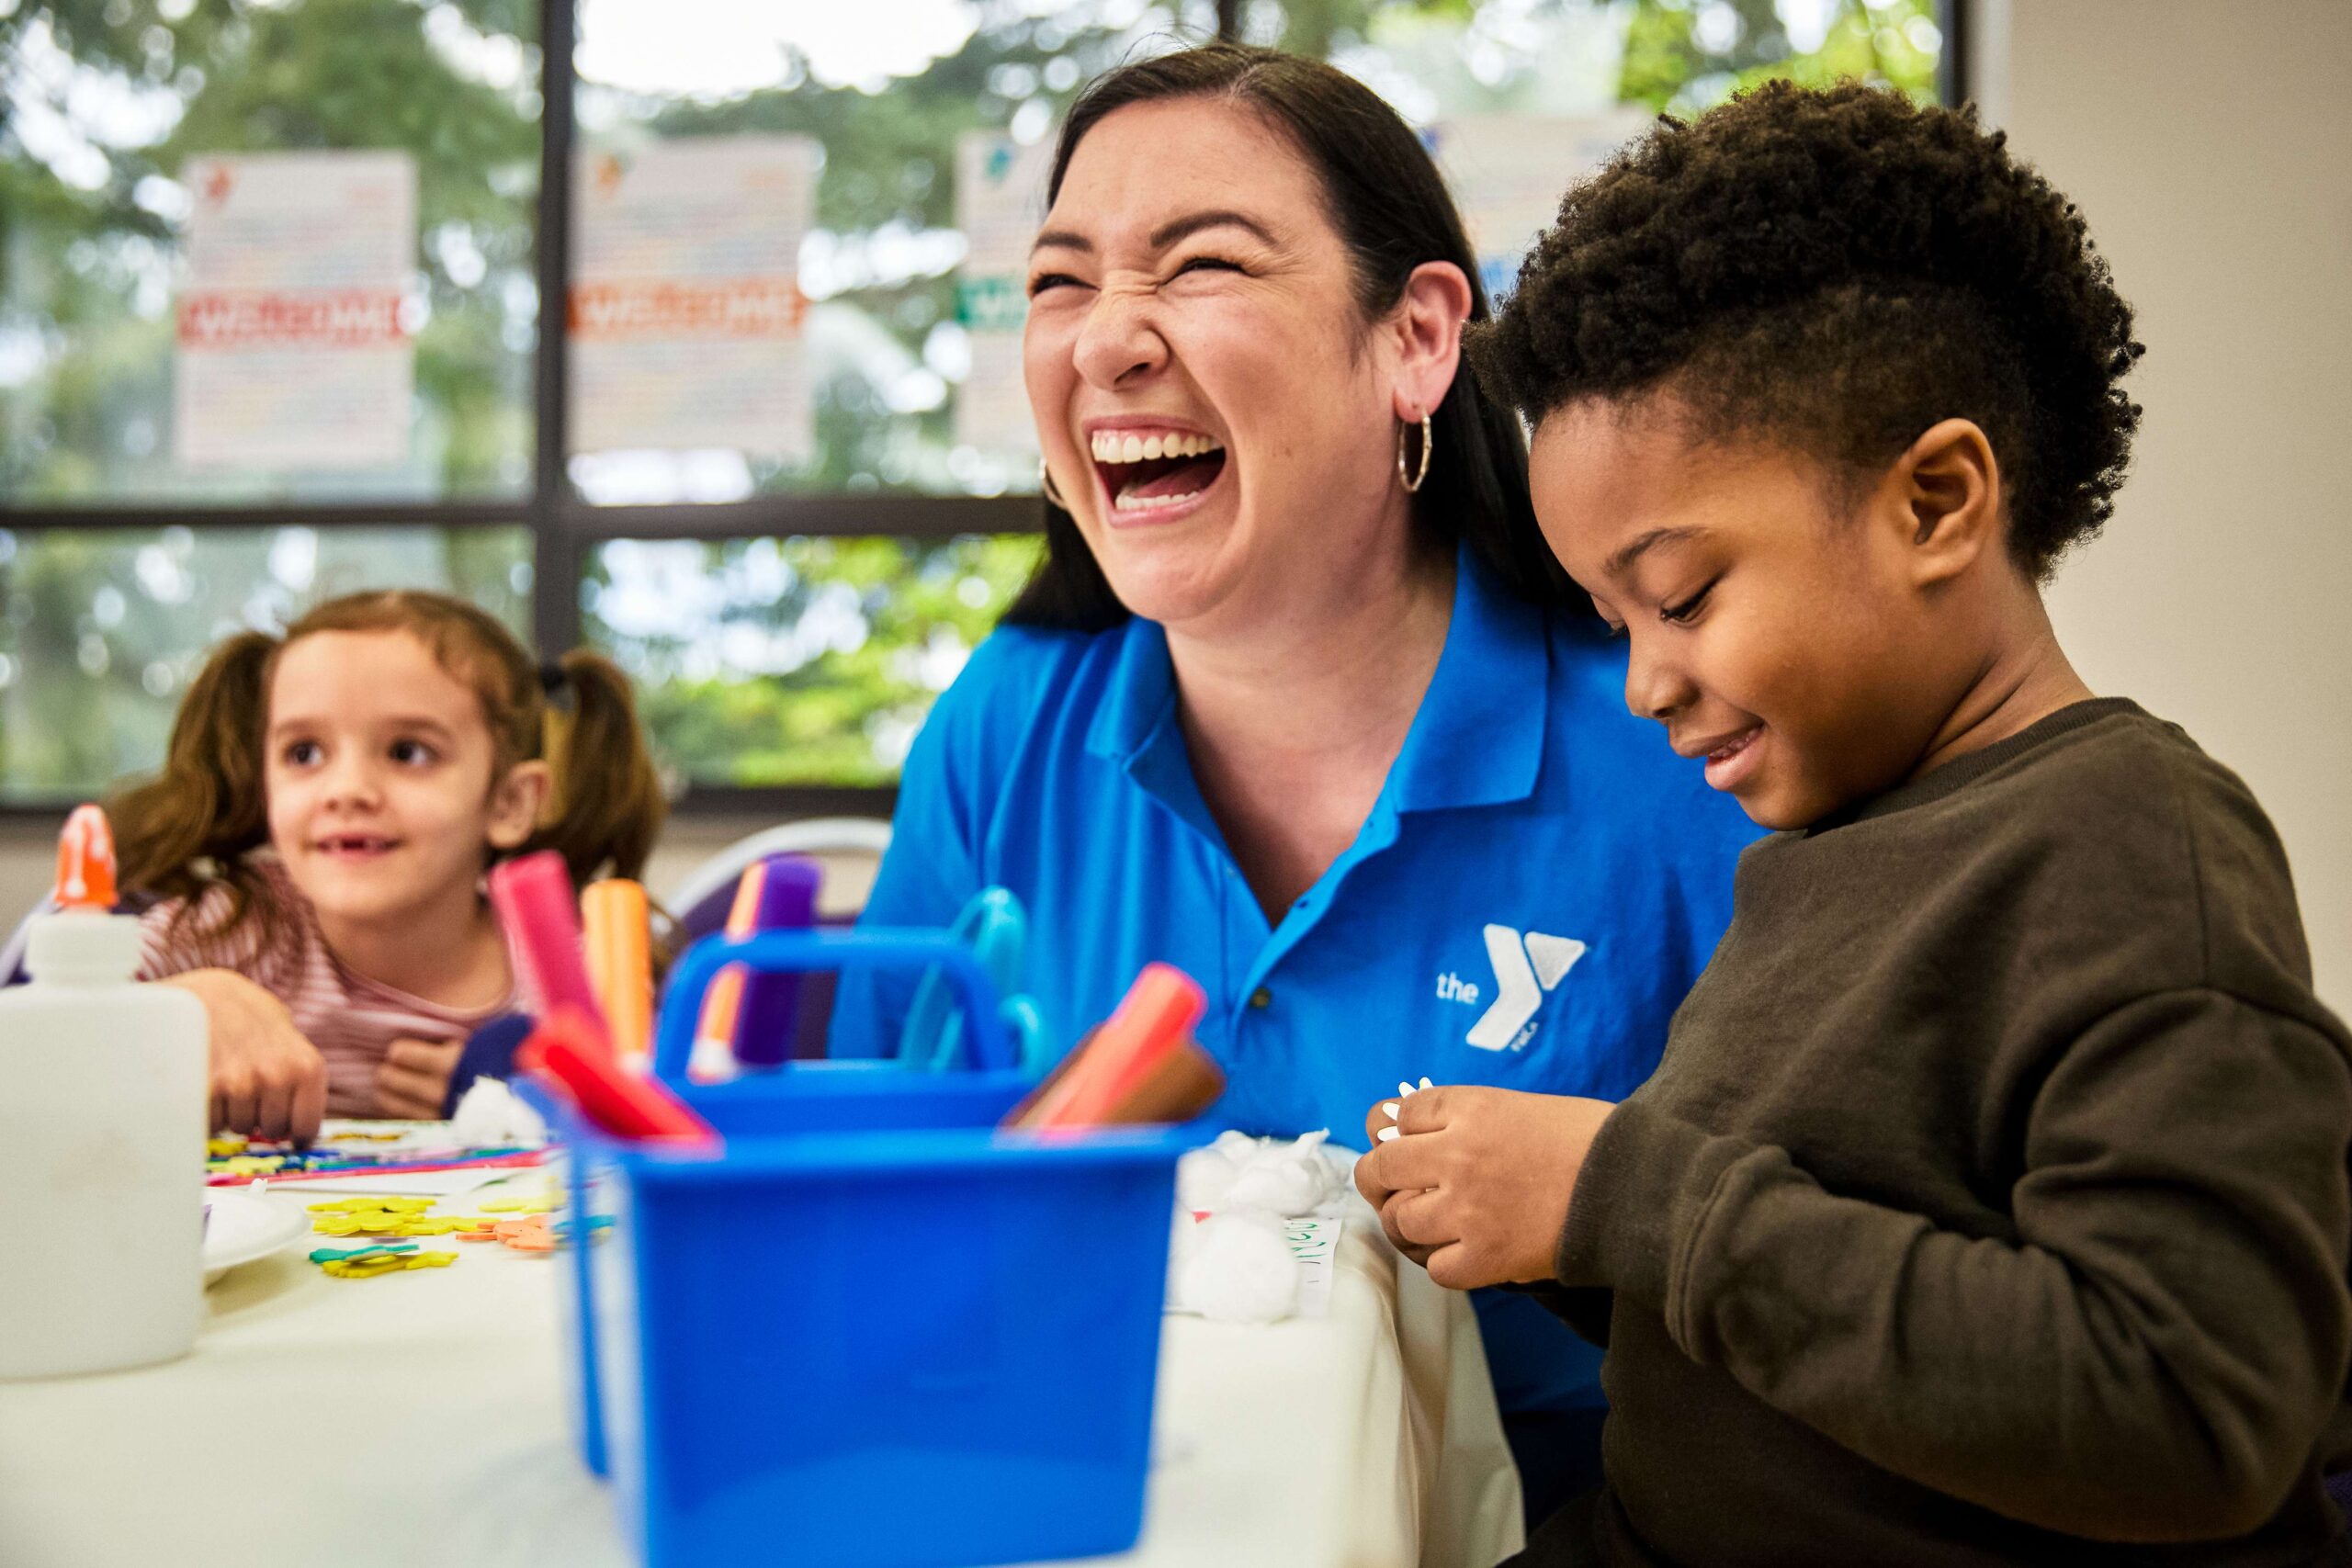 Woman smiling happily while wearing YMCA staff shirt while sitting next to two smiling children